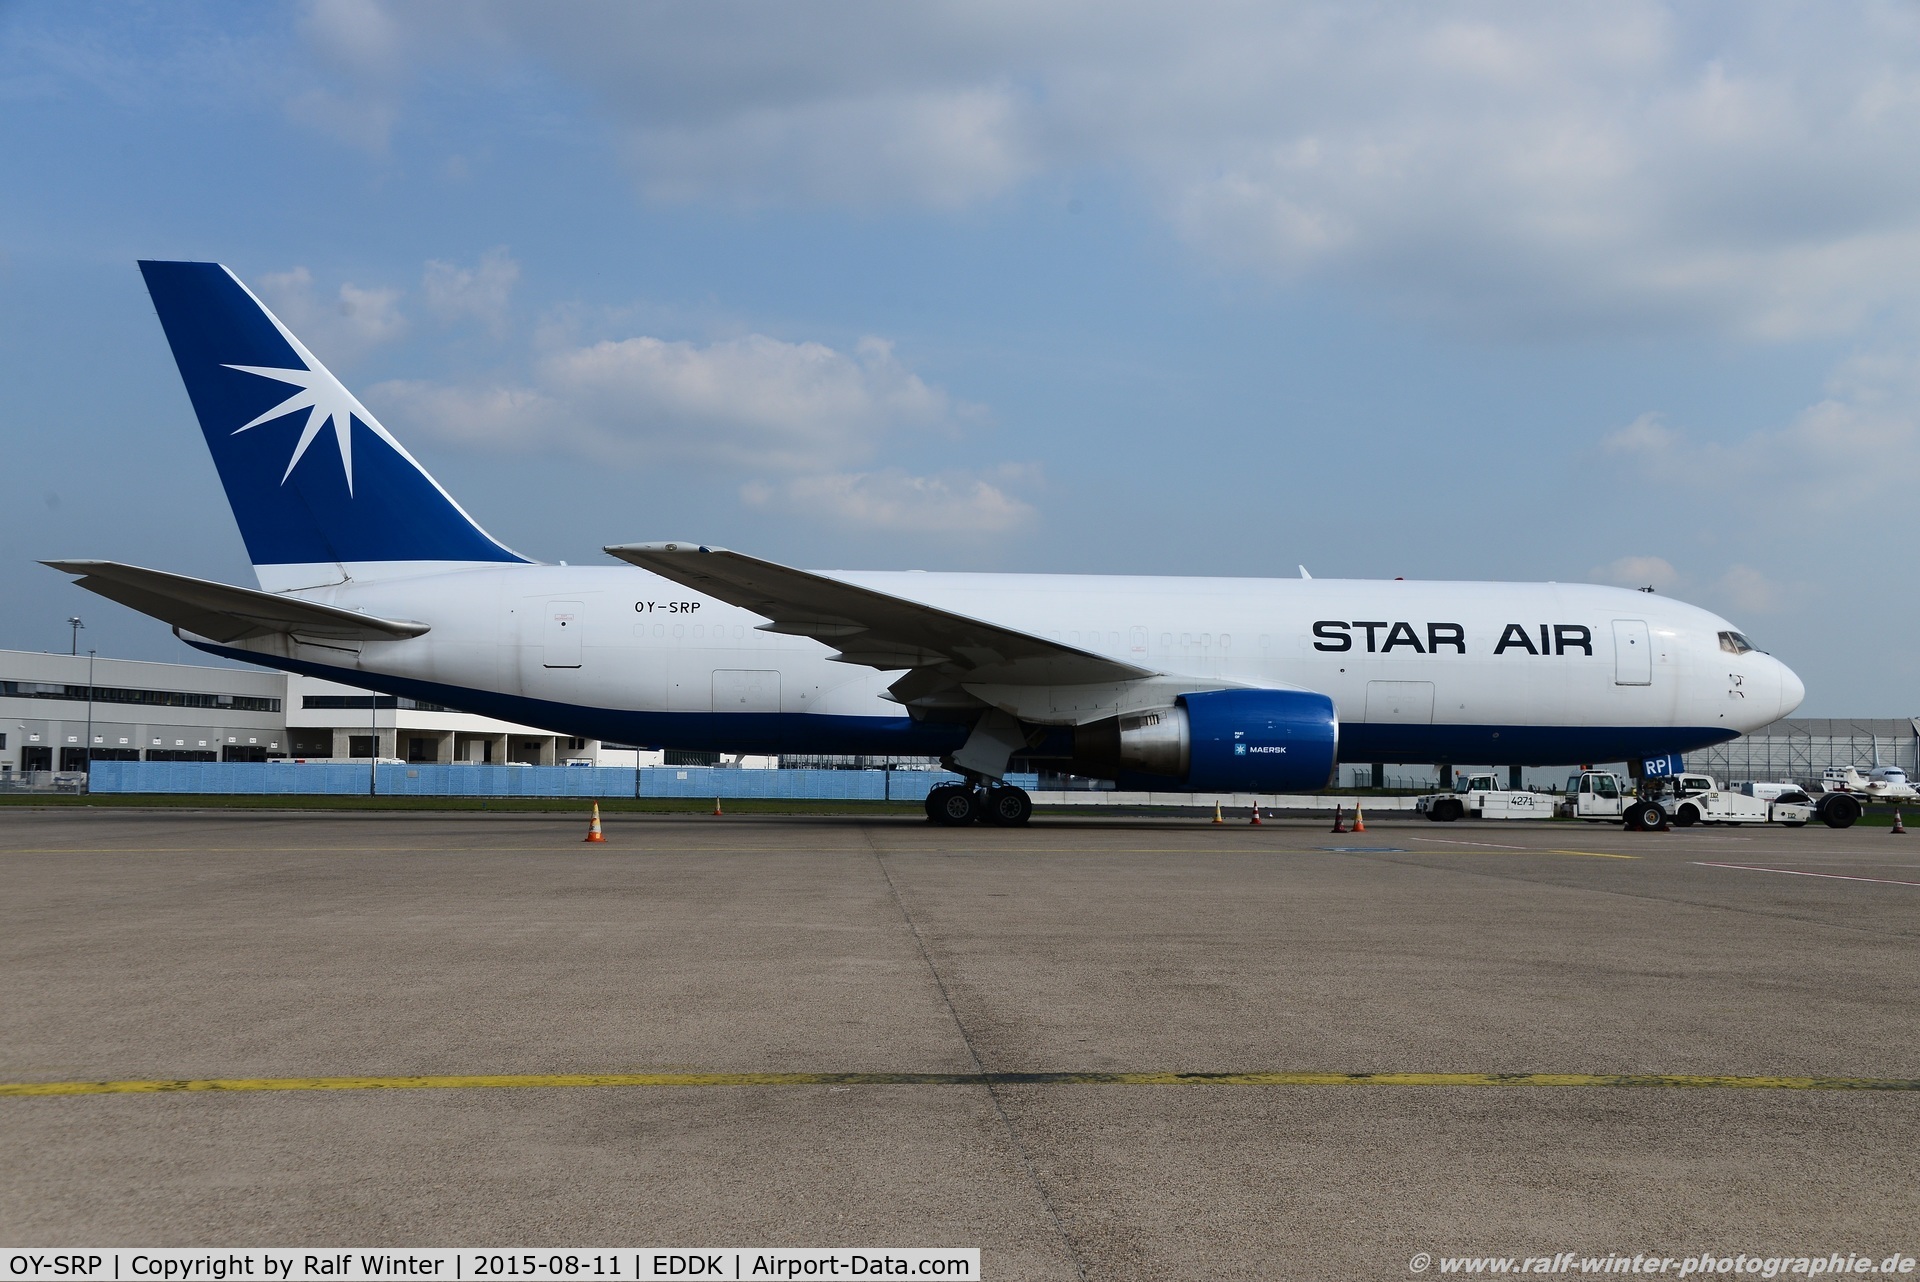 OY-SRP, 1982 Boeing 767-232 C/N 22220, Boeing 767-232BDSF - DQ SRR Star Air Freight - 22220 - OY-SRP - 11.08.2015 - CGN